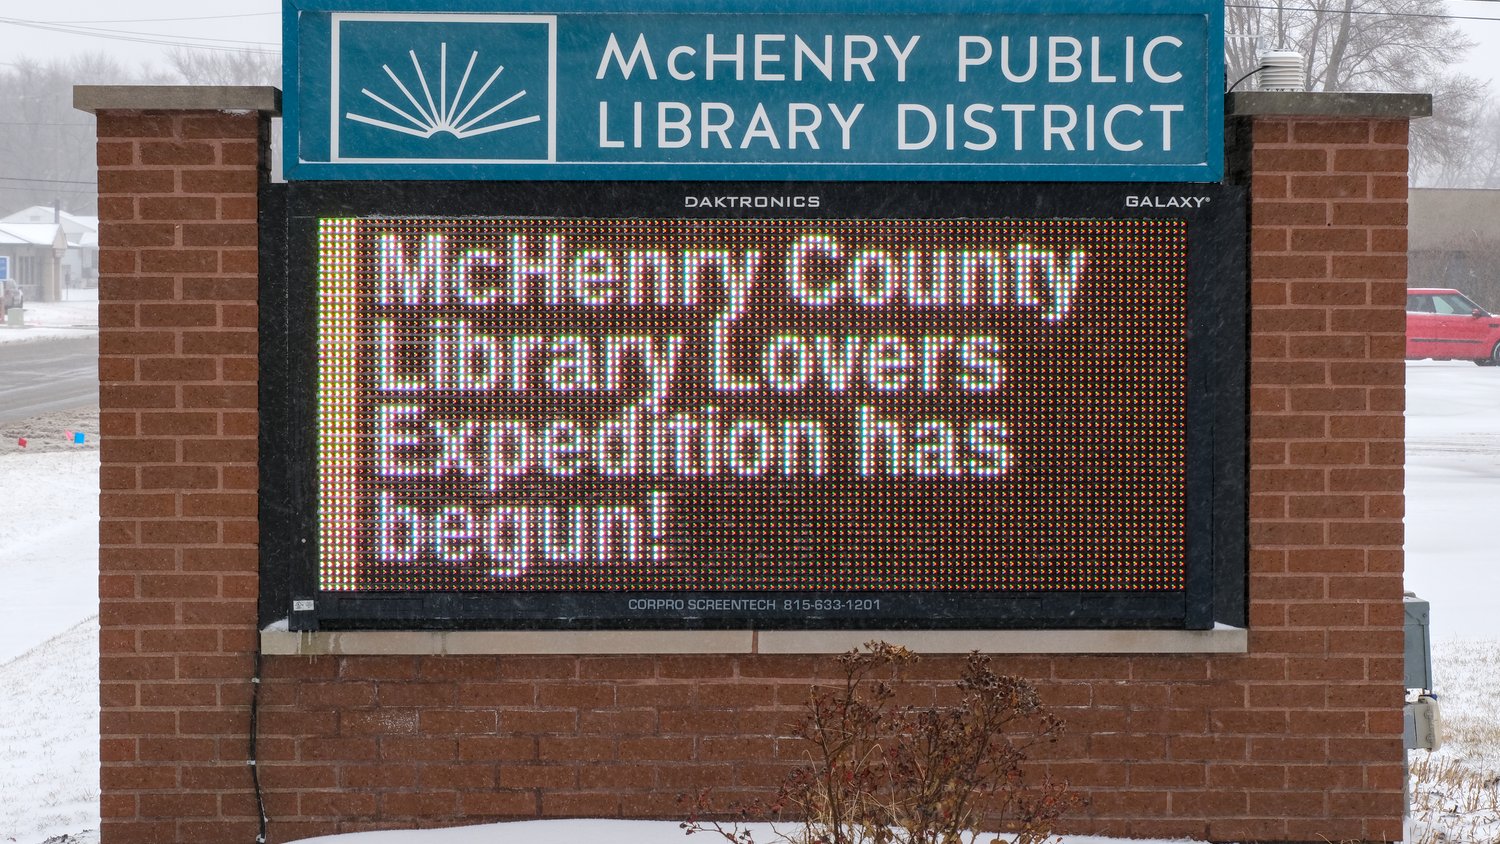 McHenry Public Library District sign.